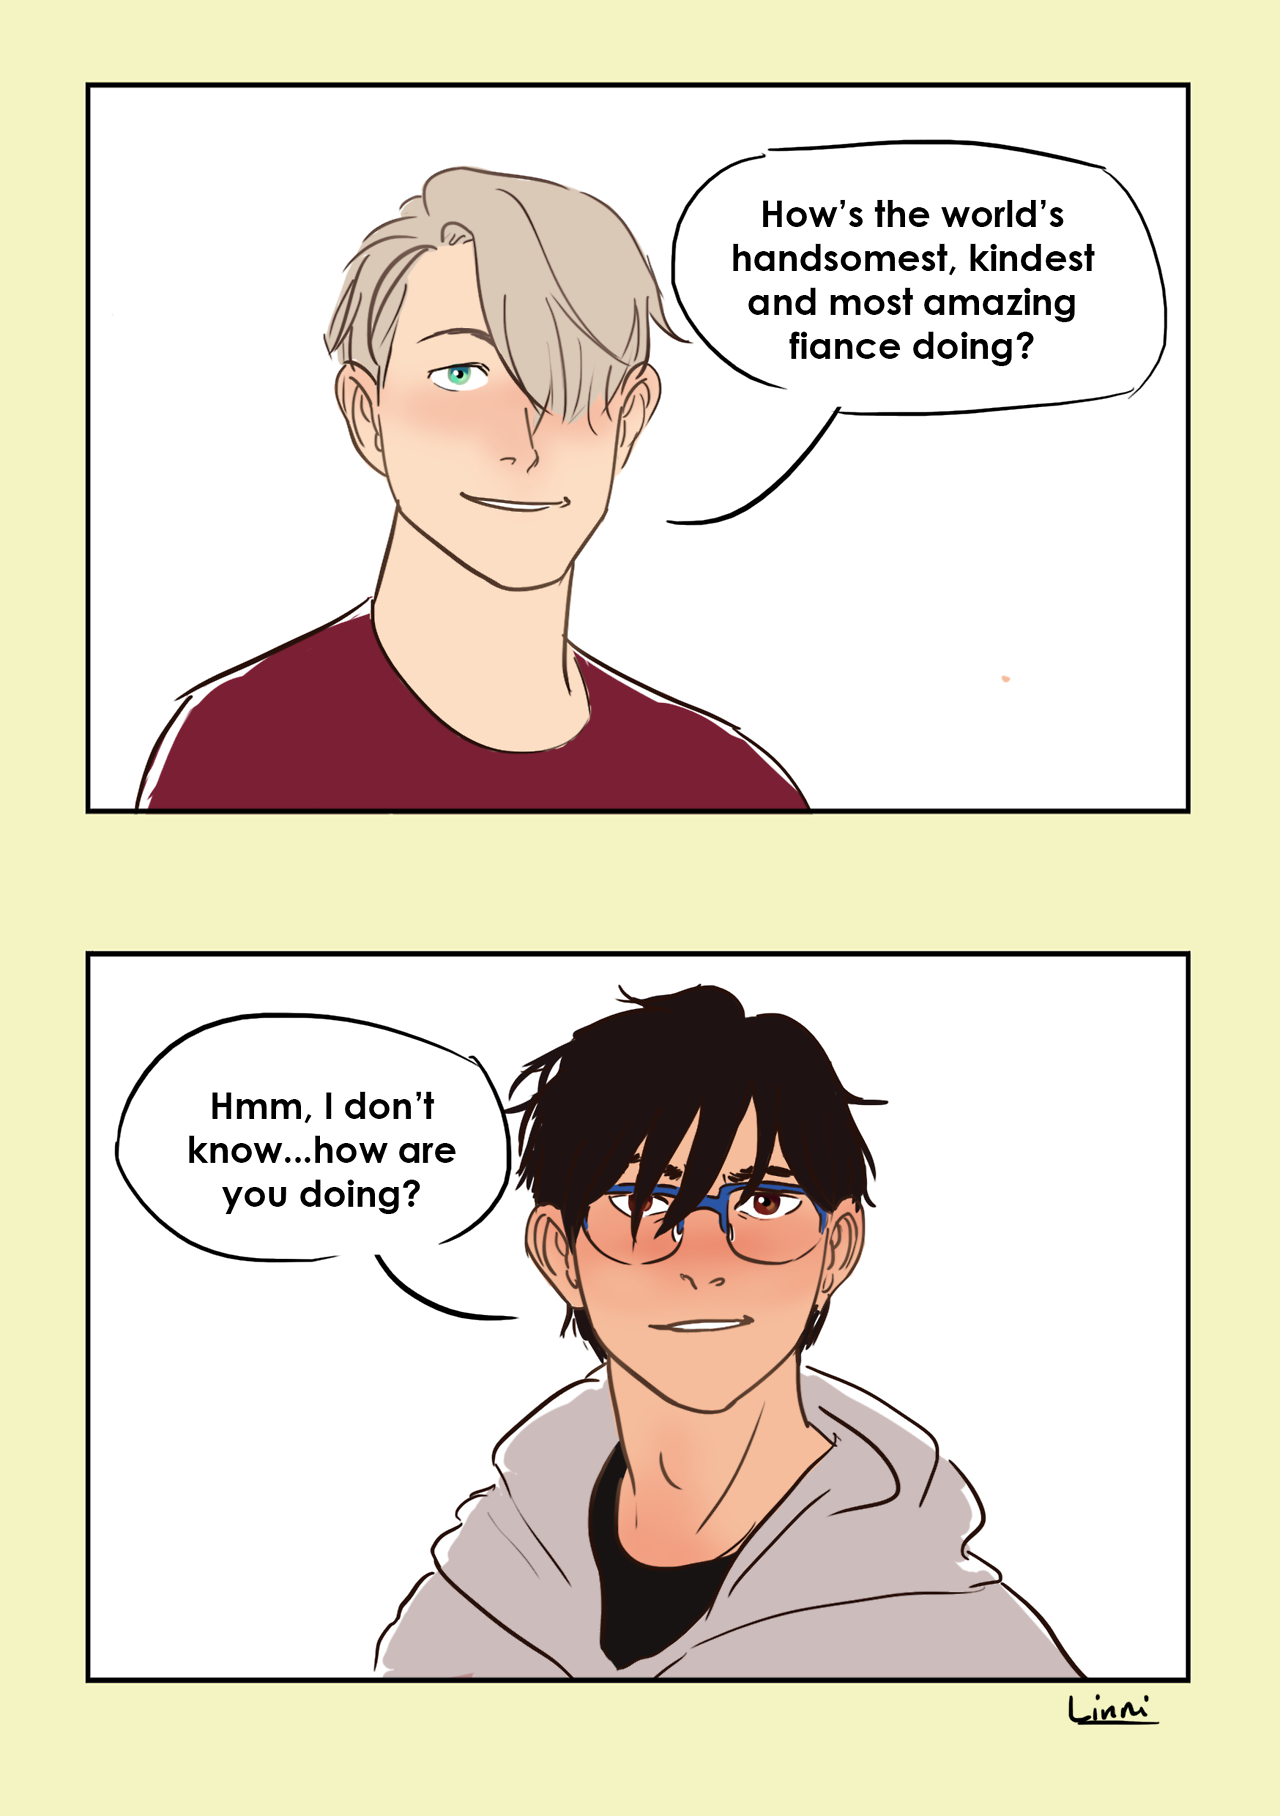 linni-t: Inspired by this because I love the idea of Yuuri getting comfortable enough